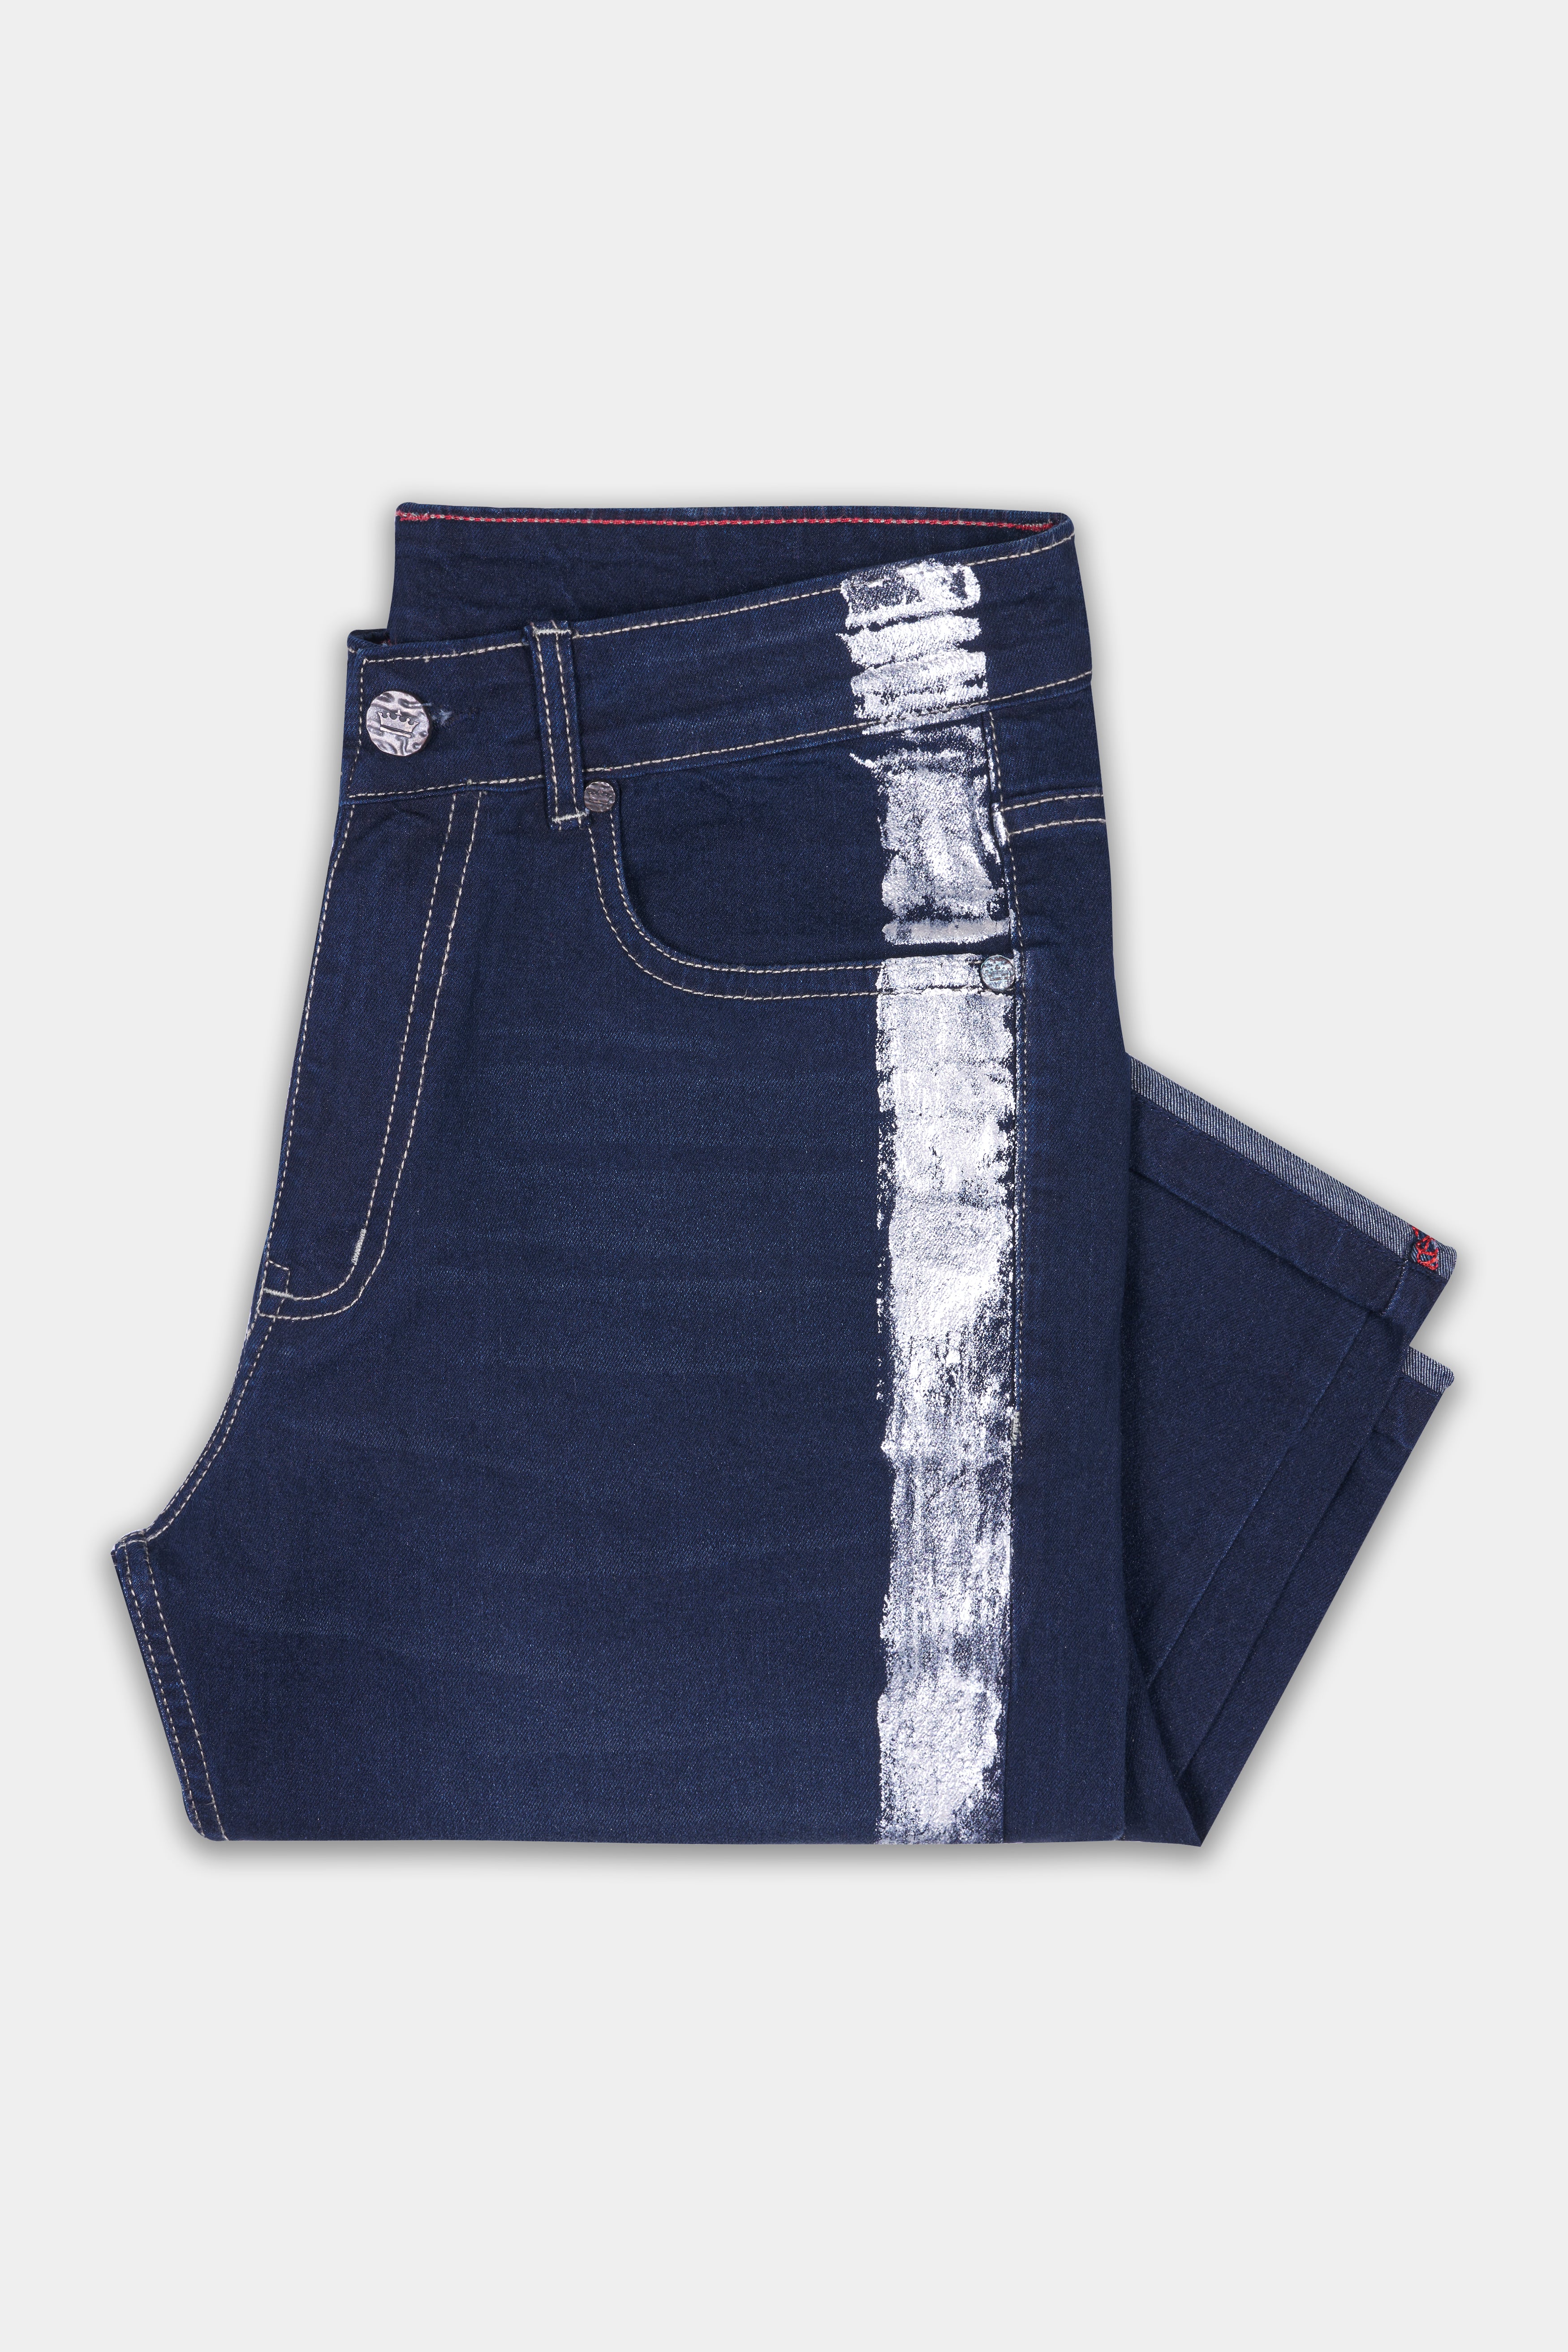 Ebony Clay Blue Whiskering Wash Hand Painted Stretchable Denim J182-ART-30, J182-ART-32, J182-ART-34, J182-ART-36, J182-ART-38, J182-ART-40